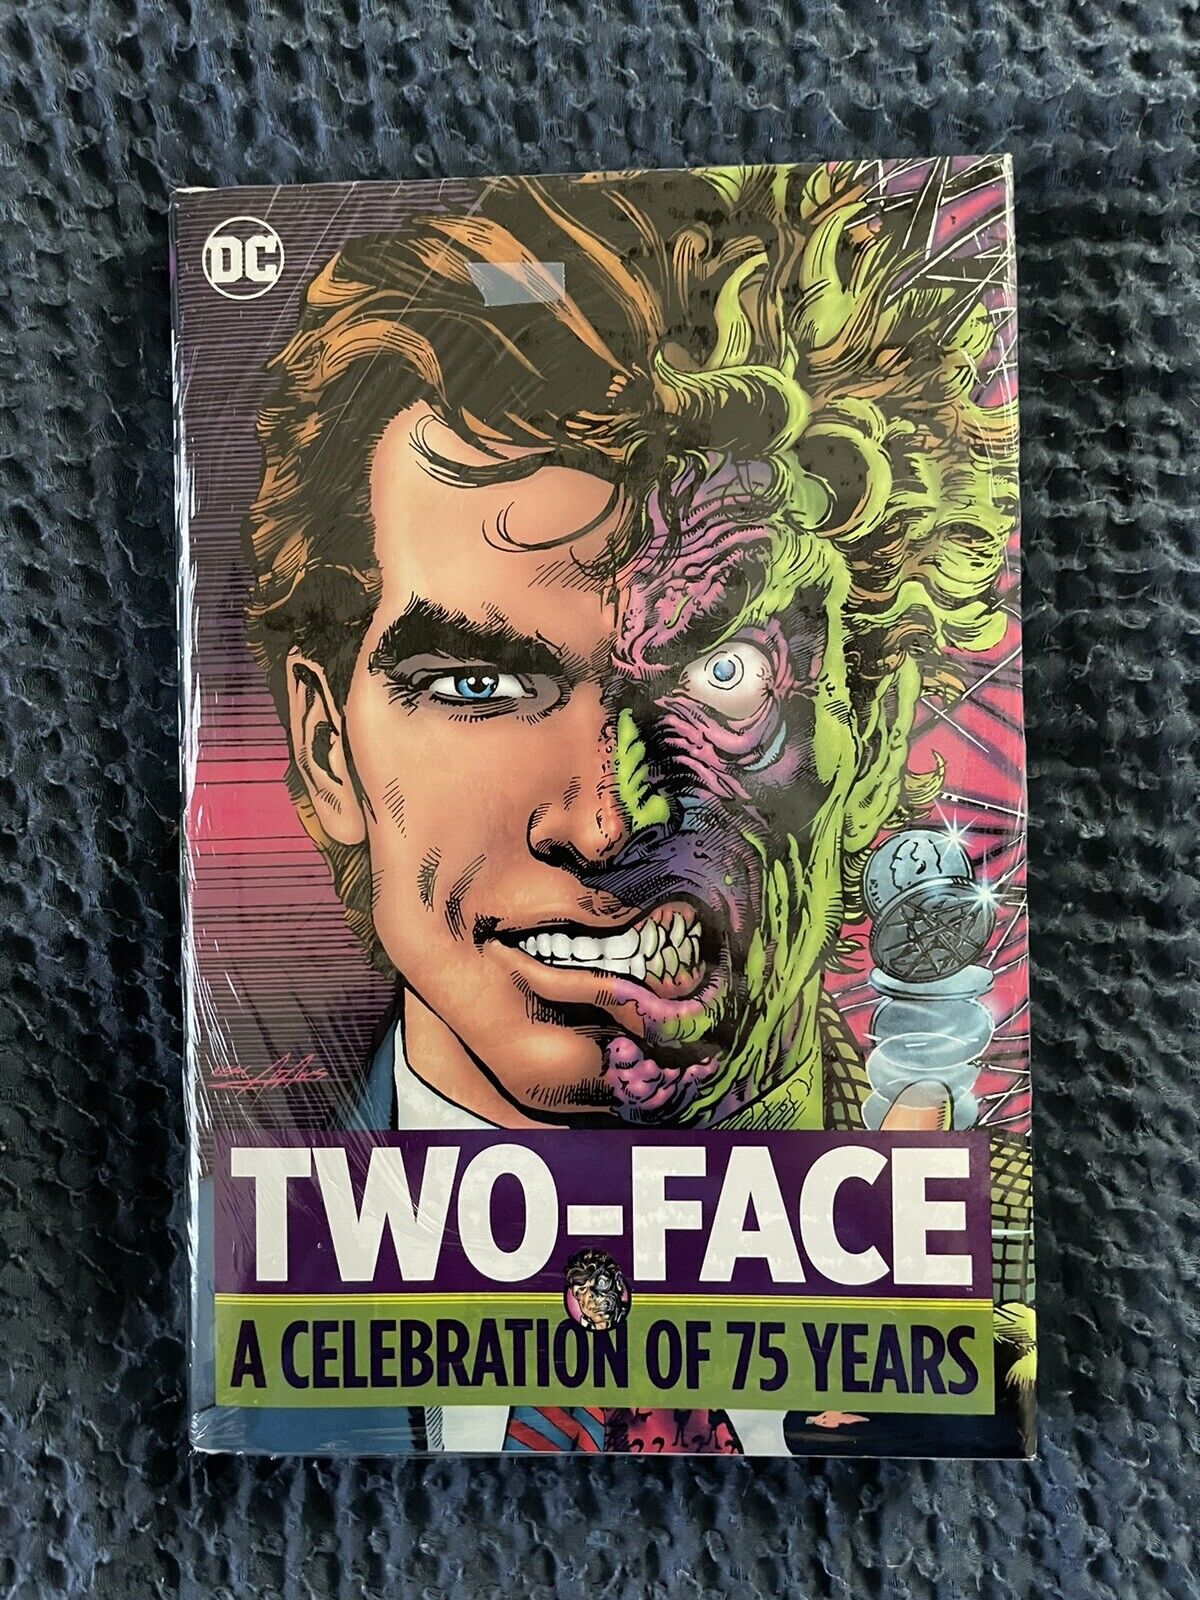 Two-Face A Celebration Of 75 Years - DC Comics  Hard Cover - 2017- Bob Kane